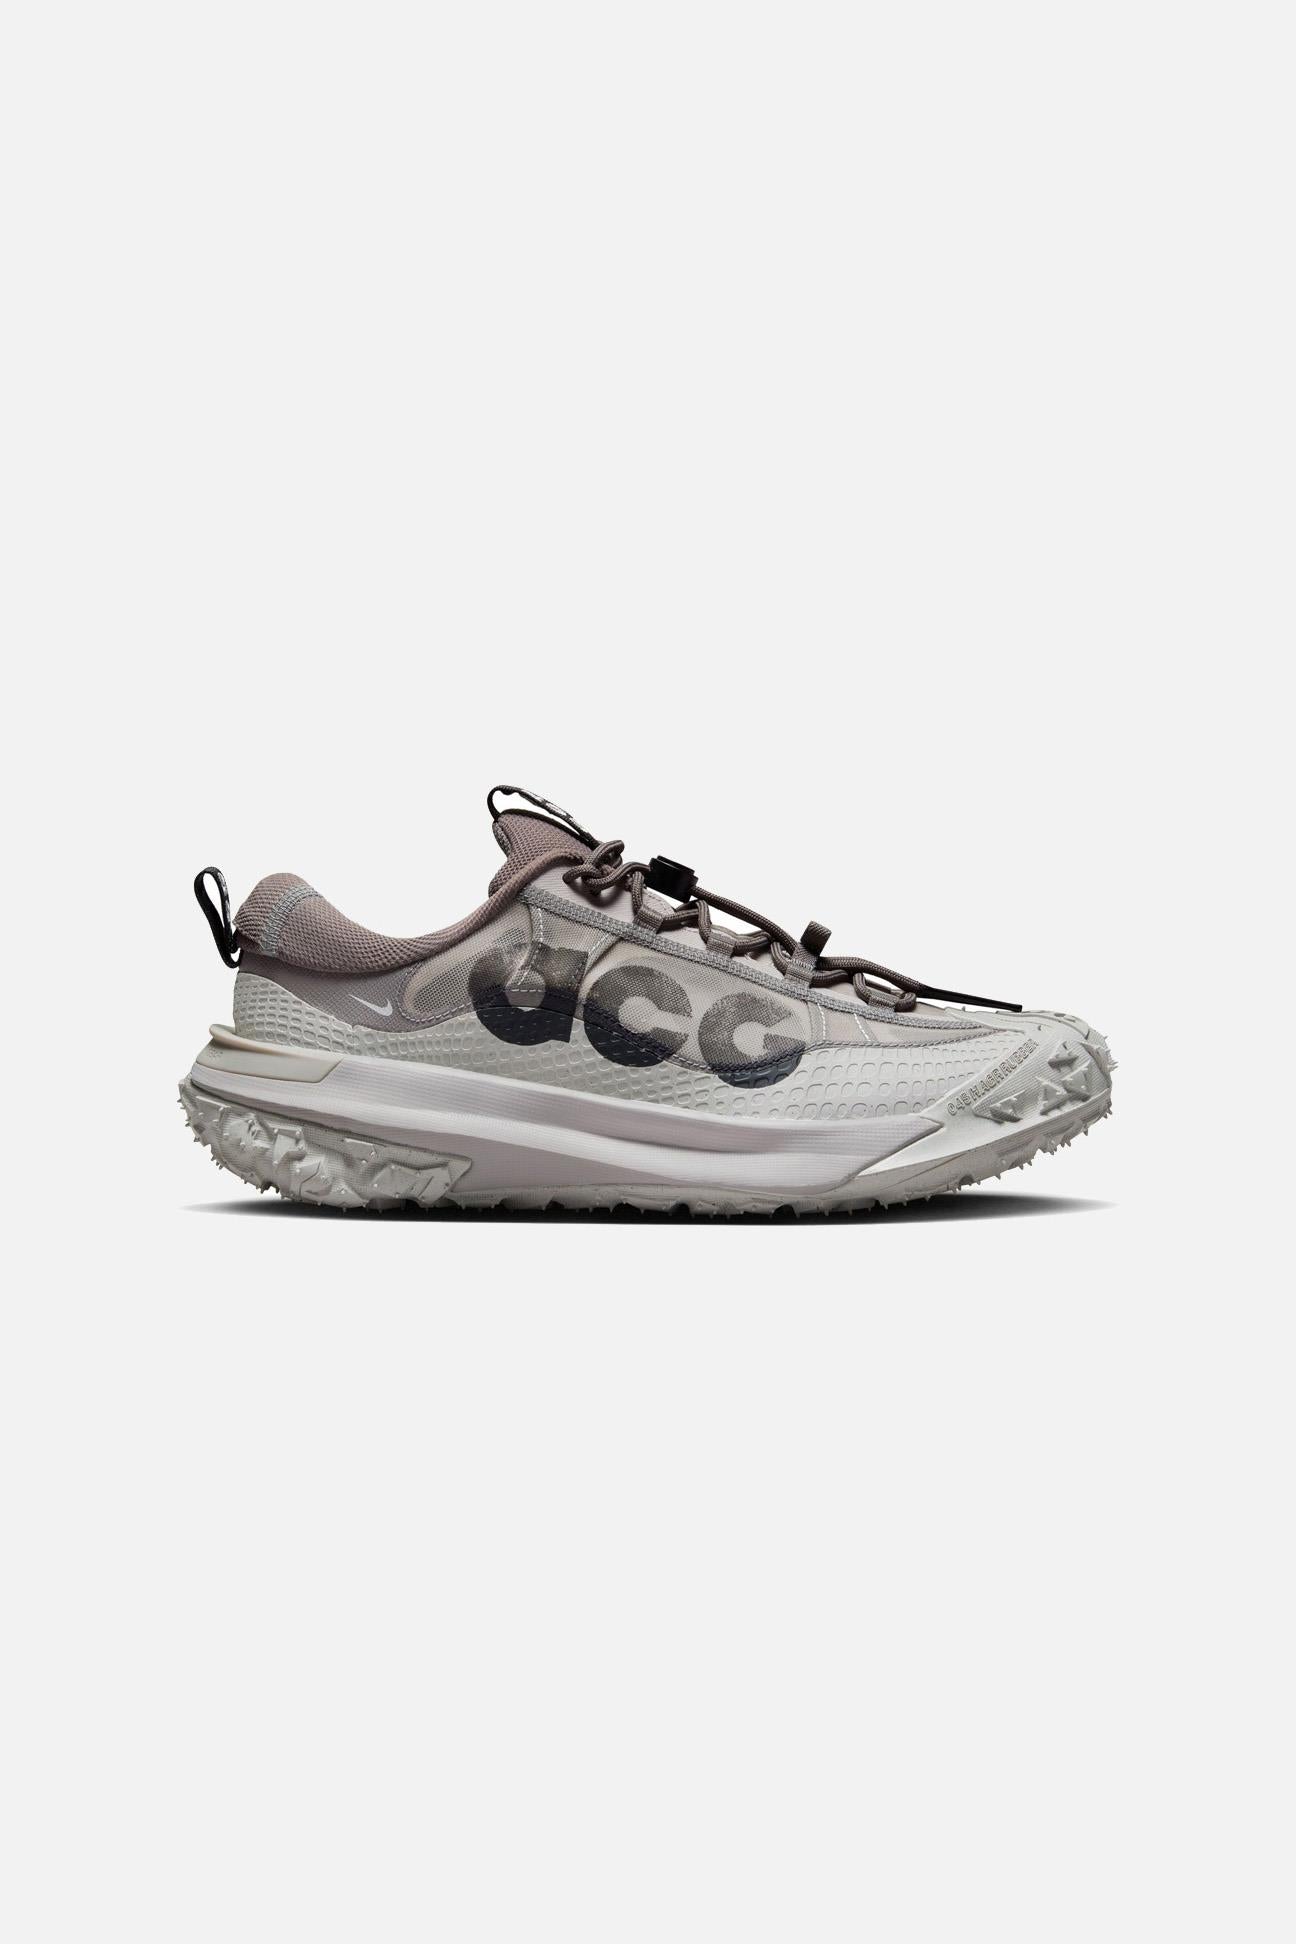 ACG Mountain Fly 2 Low 